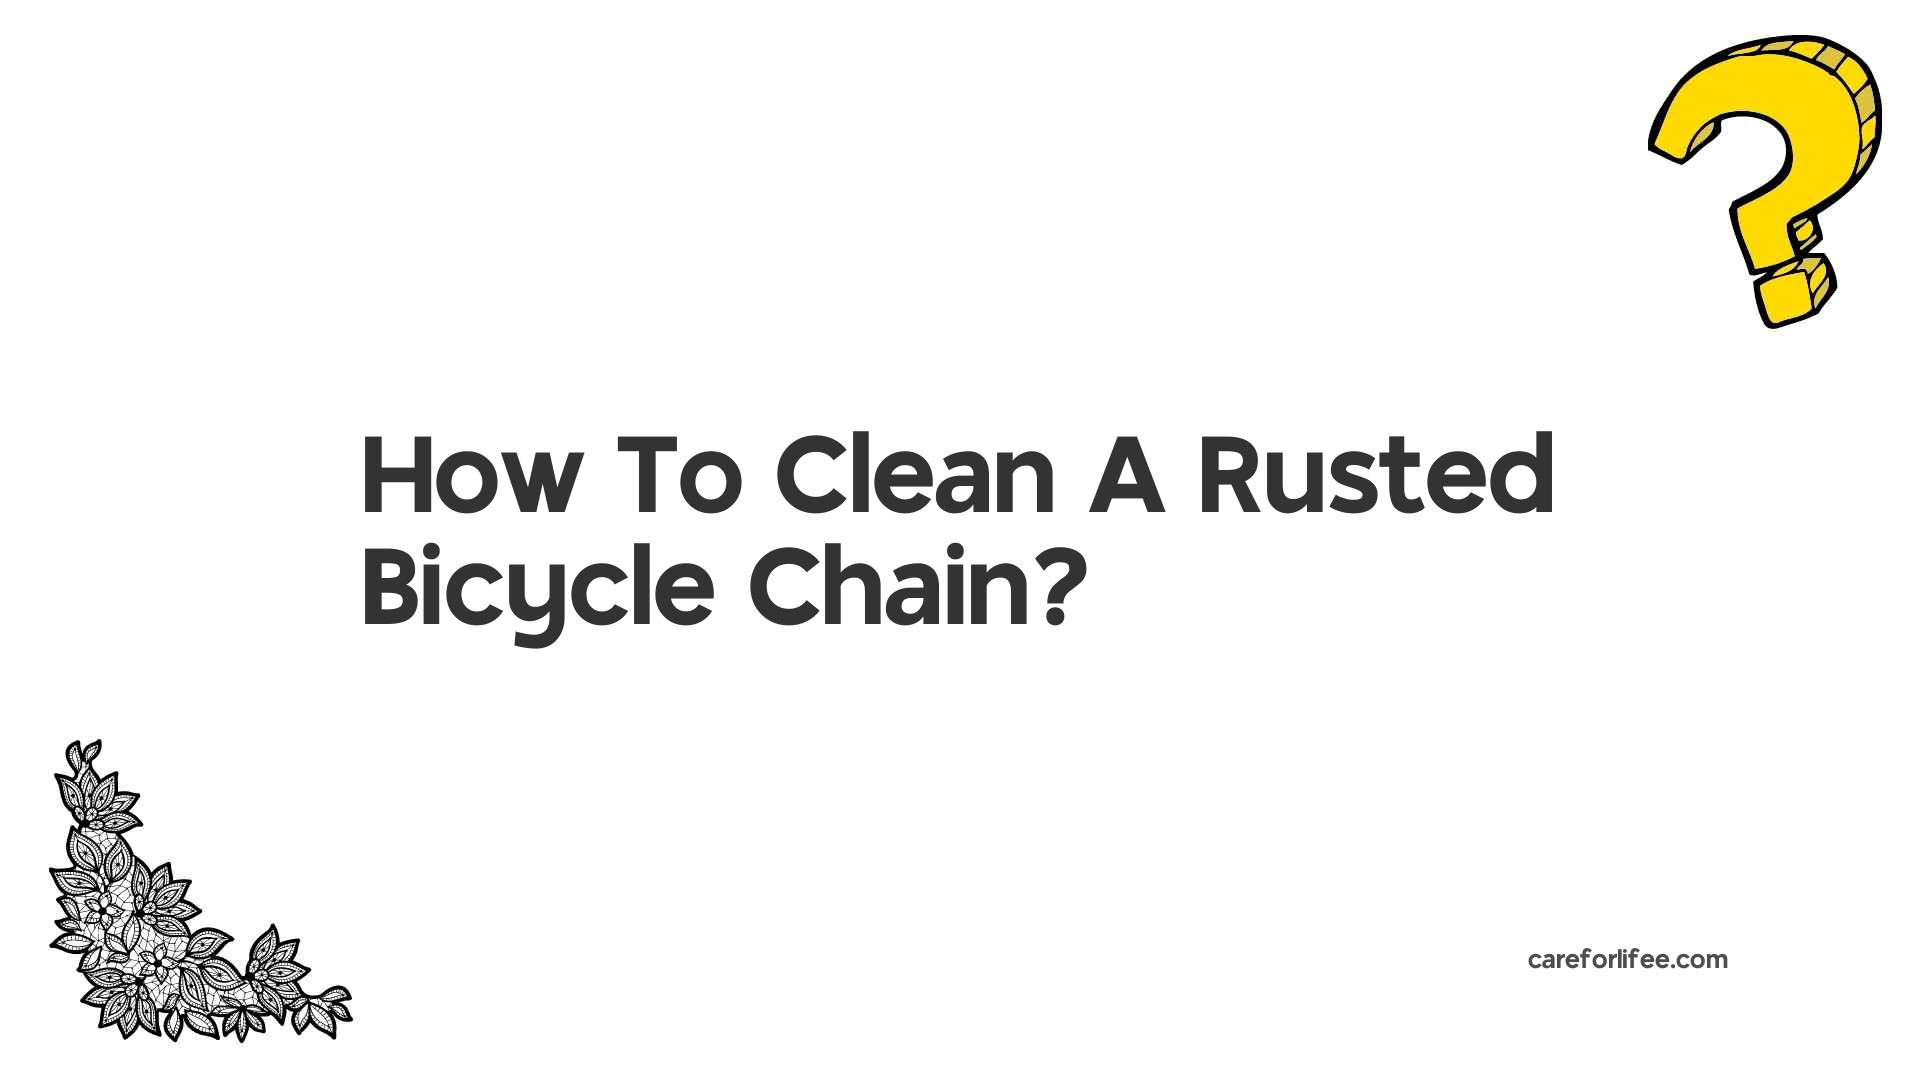 How To Clean A Rusted Bicycle Chain?